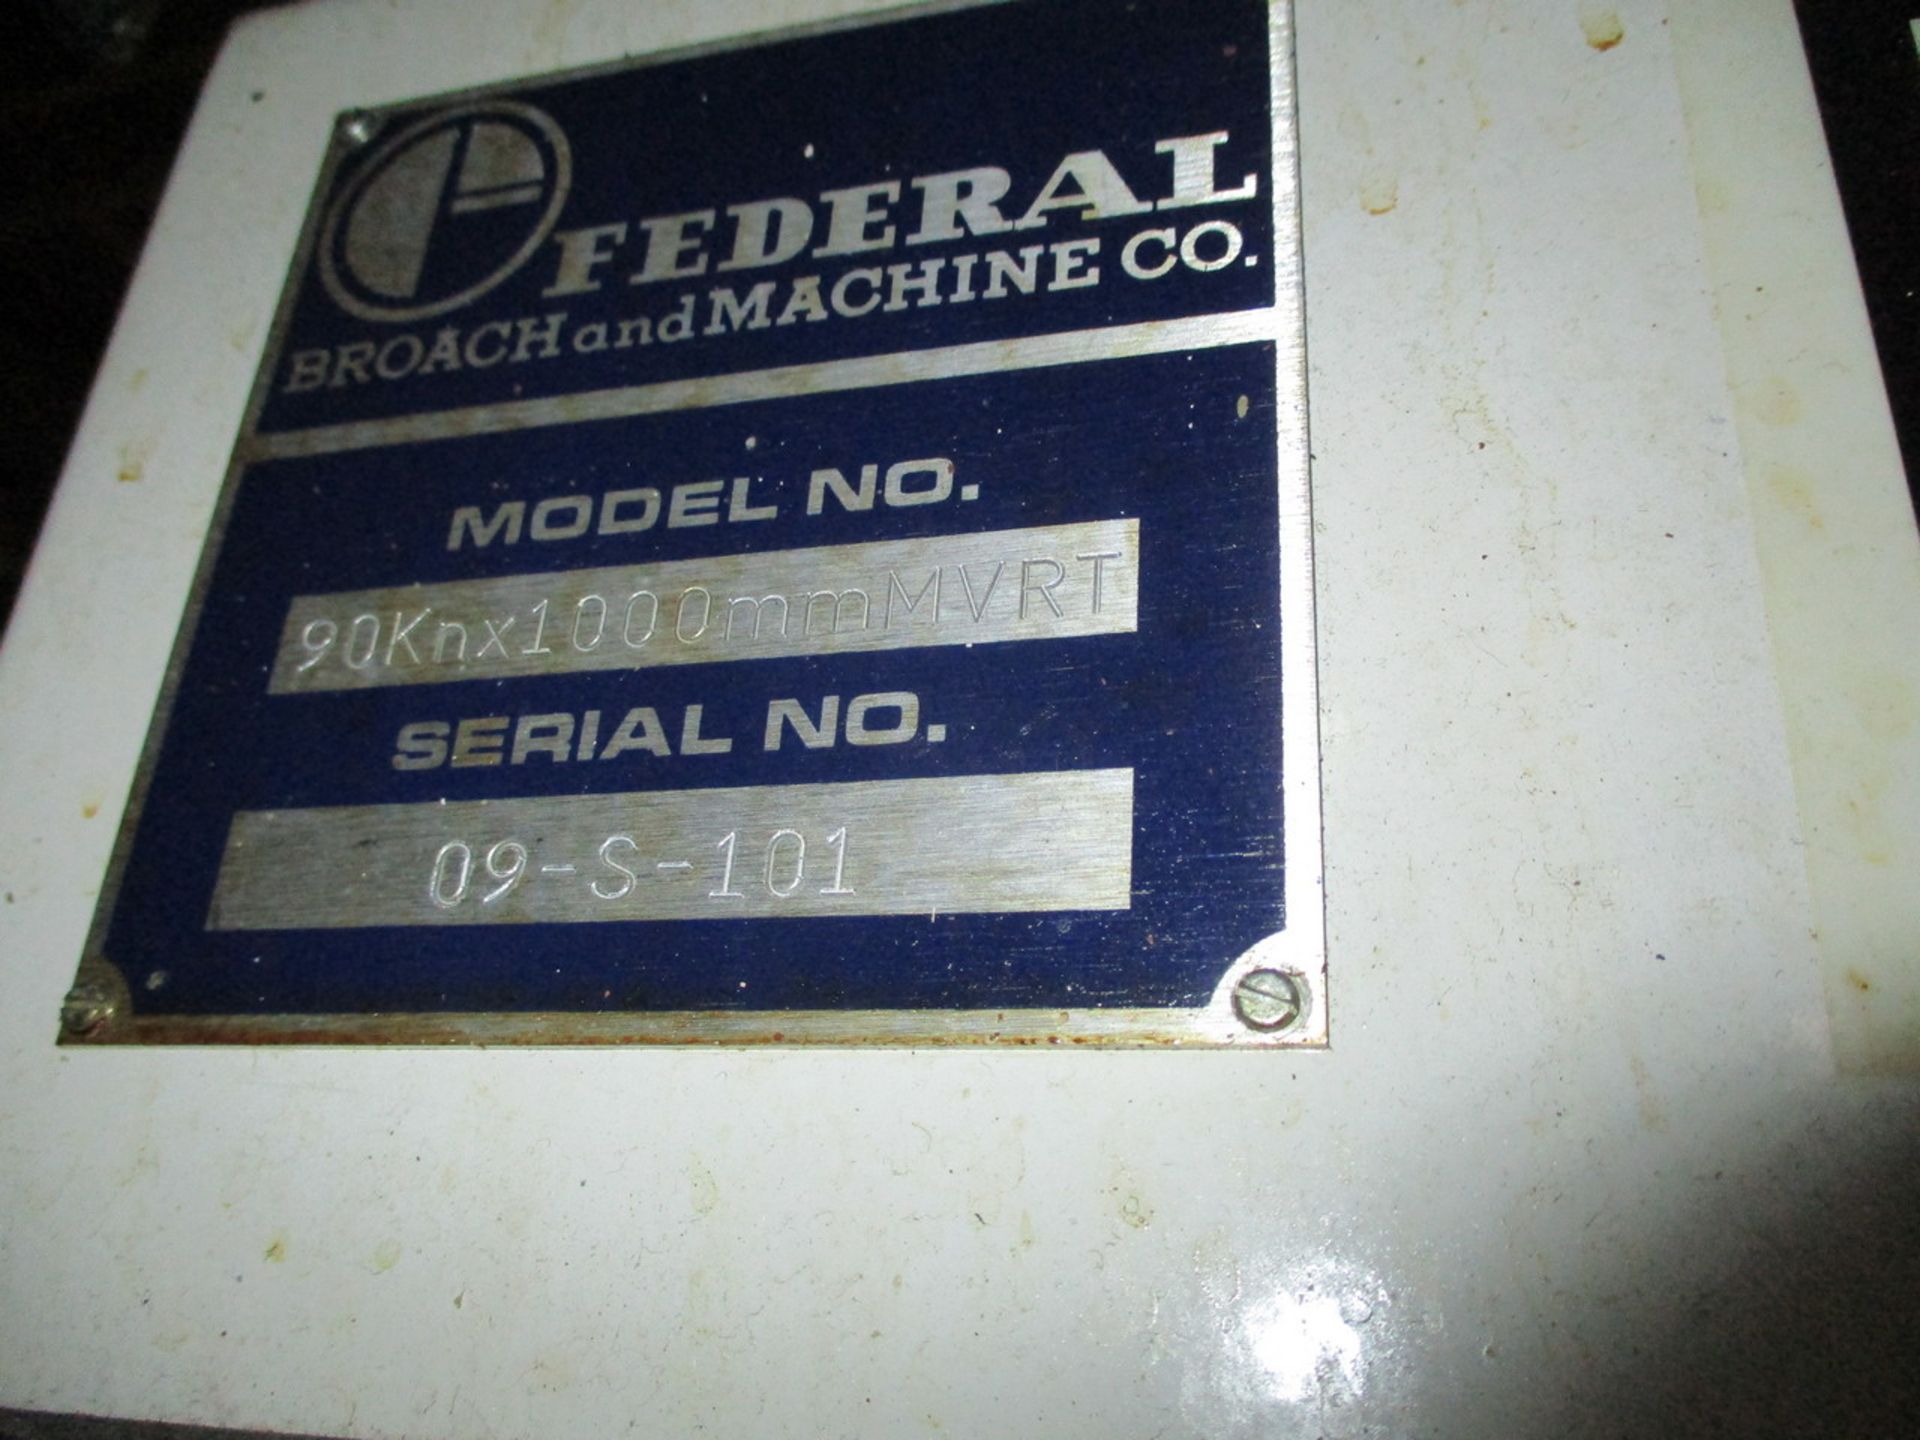 Federal Broach & Machine 90 Kn x 1000 mm MVRT Rising Table Vertical Broaching Machine - Image 5 of 15